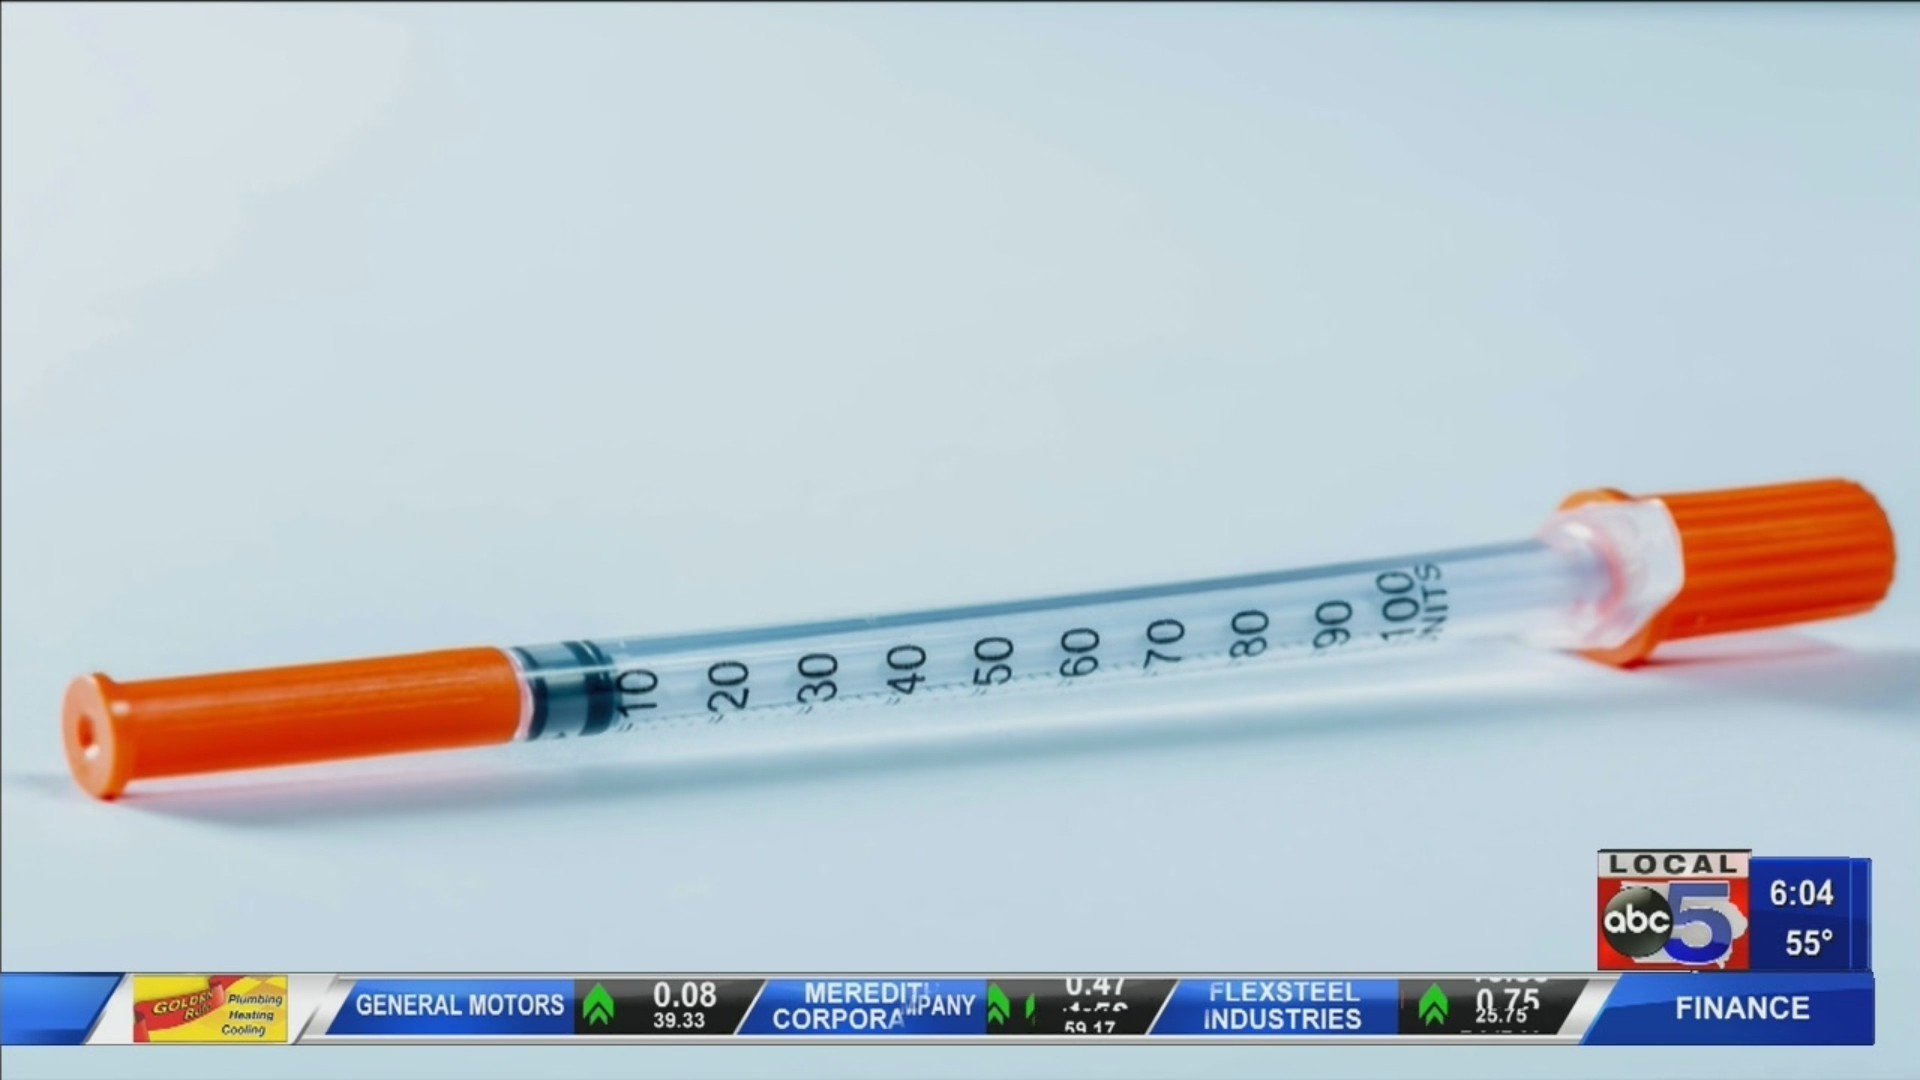 High insulin prices causing concerns for diabetics